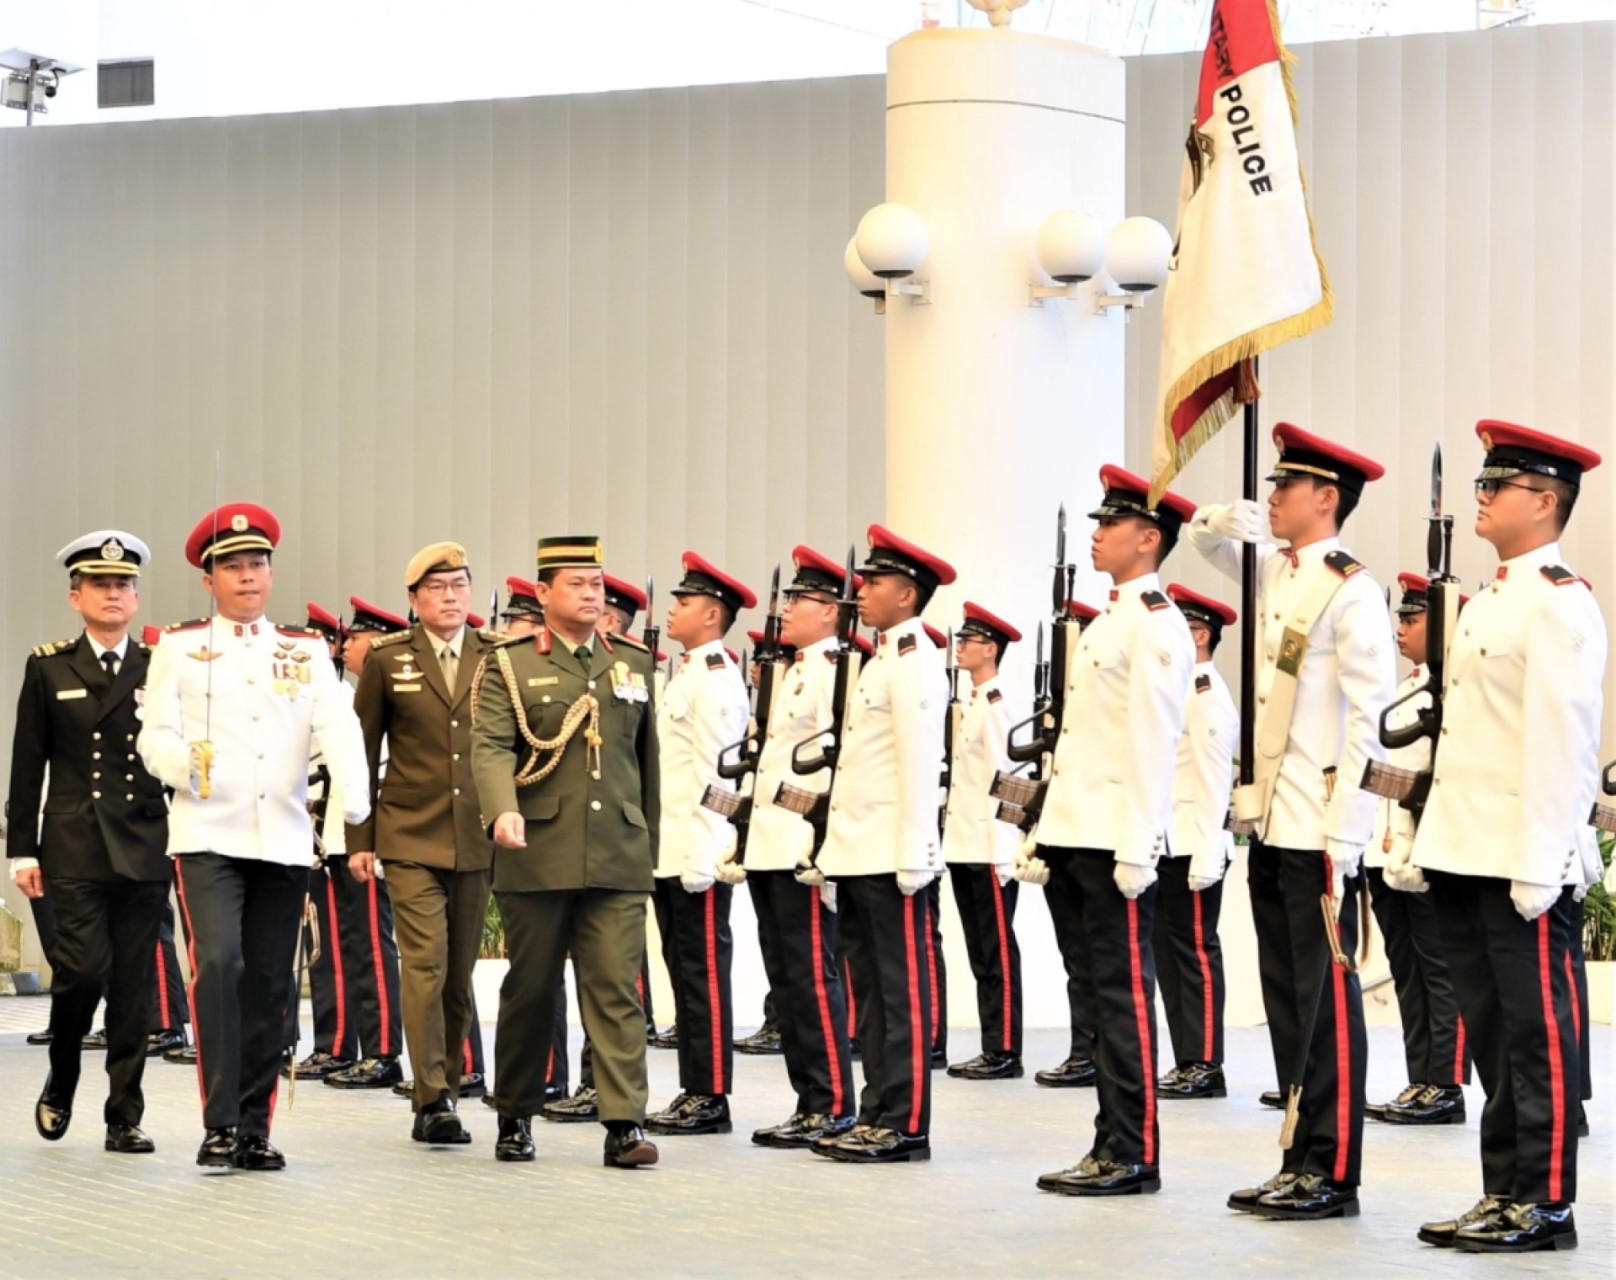 MG Dato Haszaimi inspecting the Guard of Honour at MINDEF earlier today.